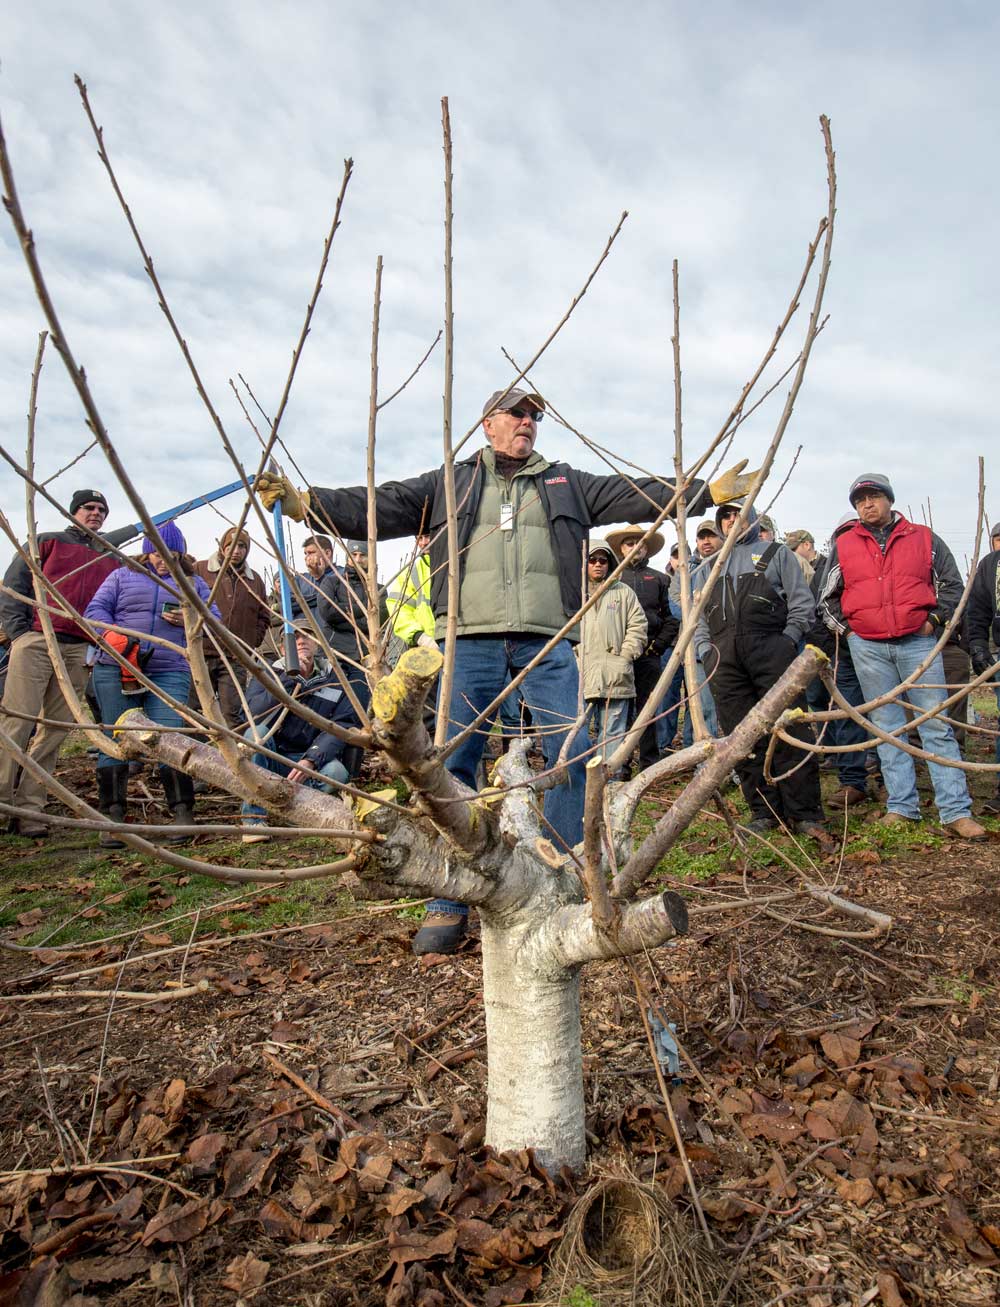 Gipp Redman instructs growers how to winter prune KGB cherry trees in December 2015 in an orchard near The Dalles, Oregon. The KGB tree architecture is popular in the Columbia Gorge and Australia for its low cost to harvest and attractiveness to labor, though growers and experts admit they still have a lot to learn about proper cutting techniques to ensure adequate renewal growth. <b>(TJ Mullinax/Good Fruit Grower file photo)</b>